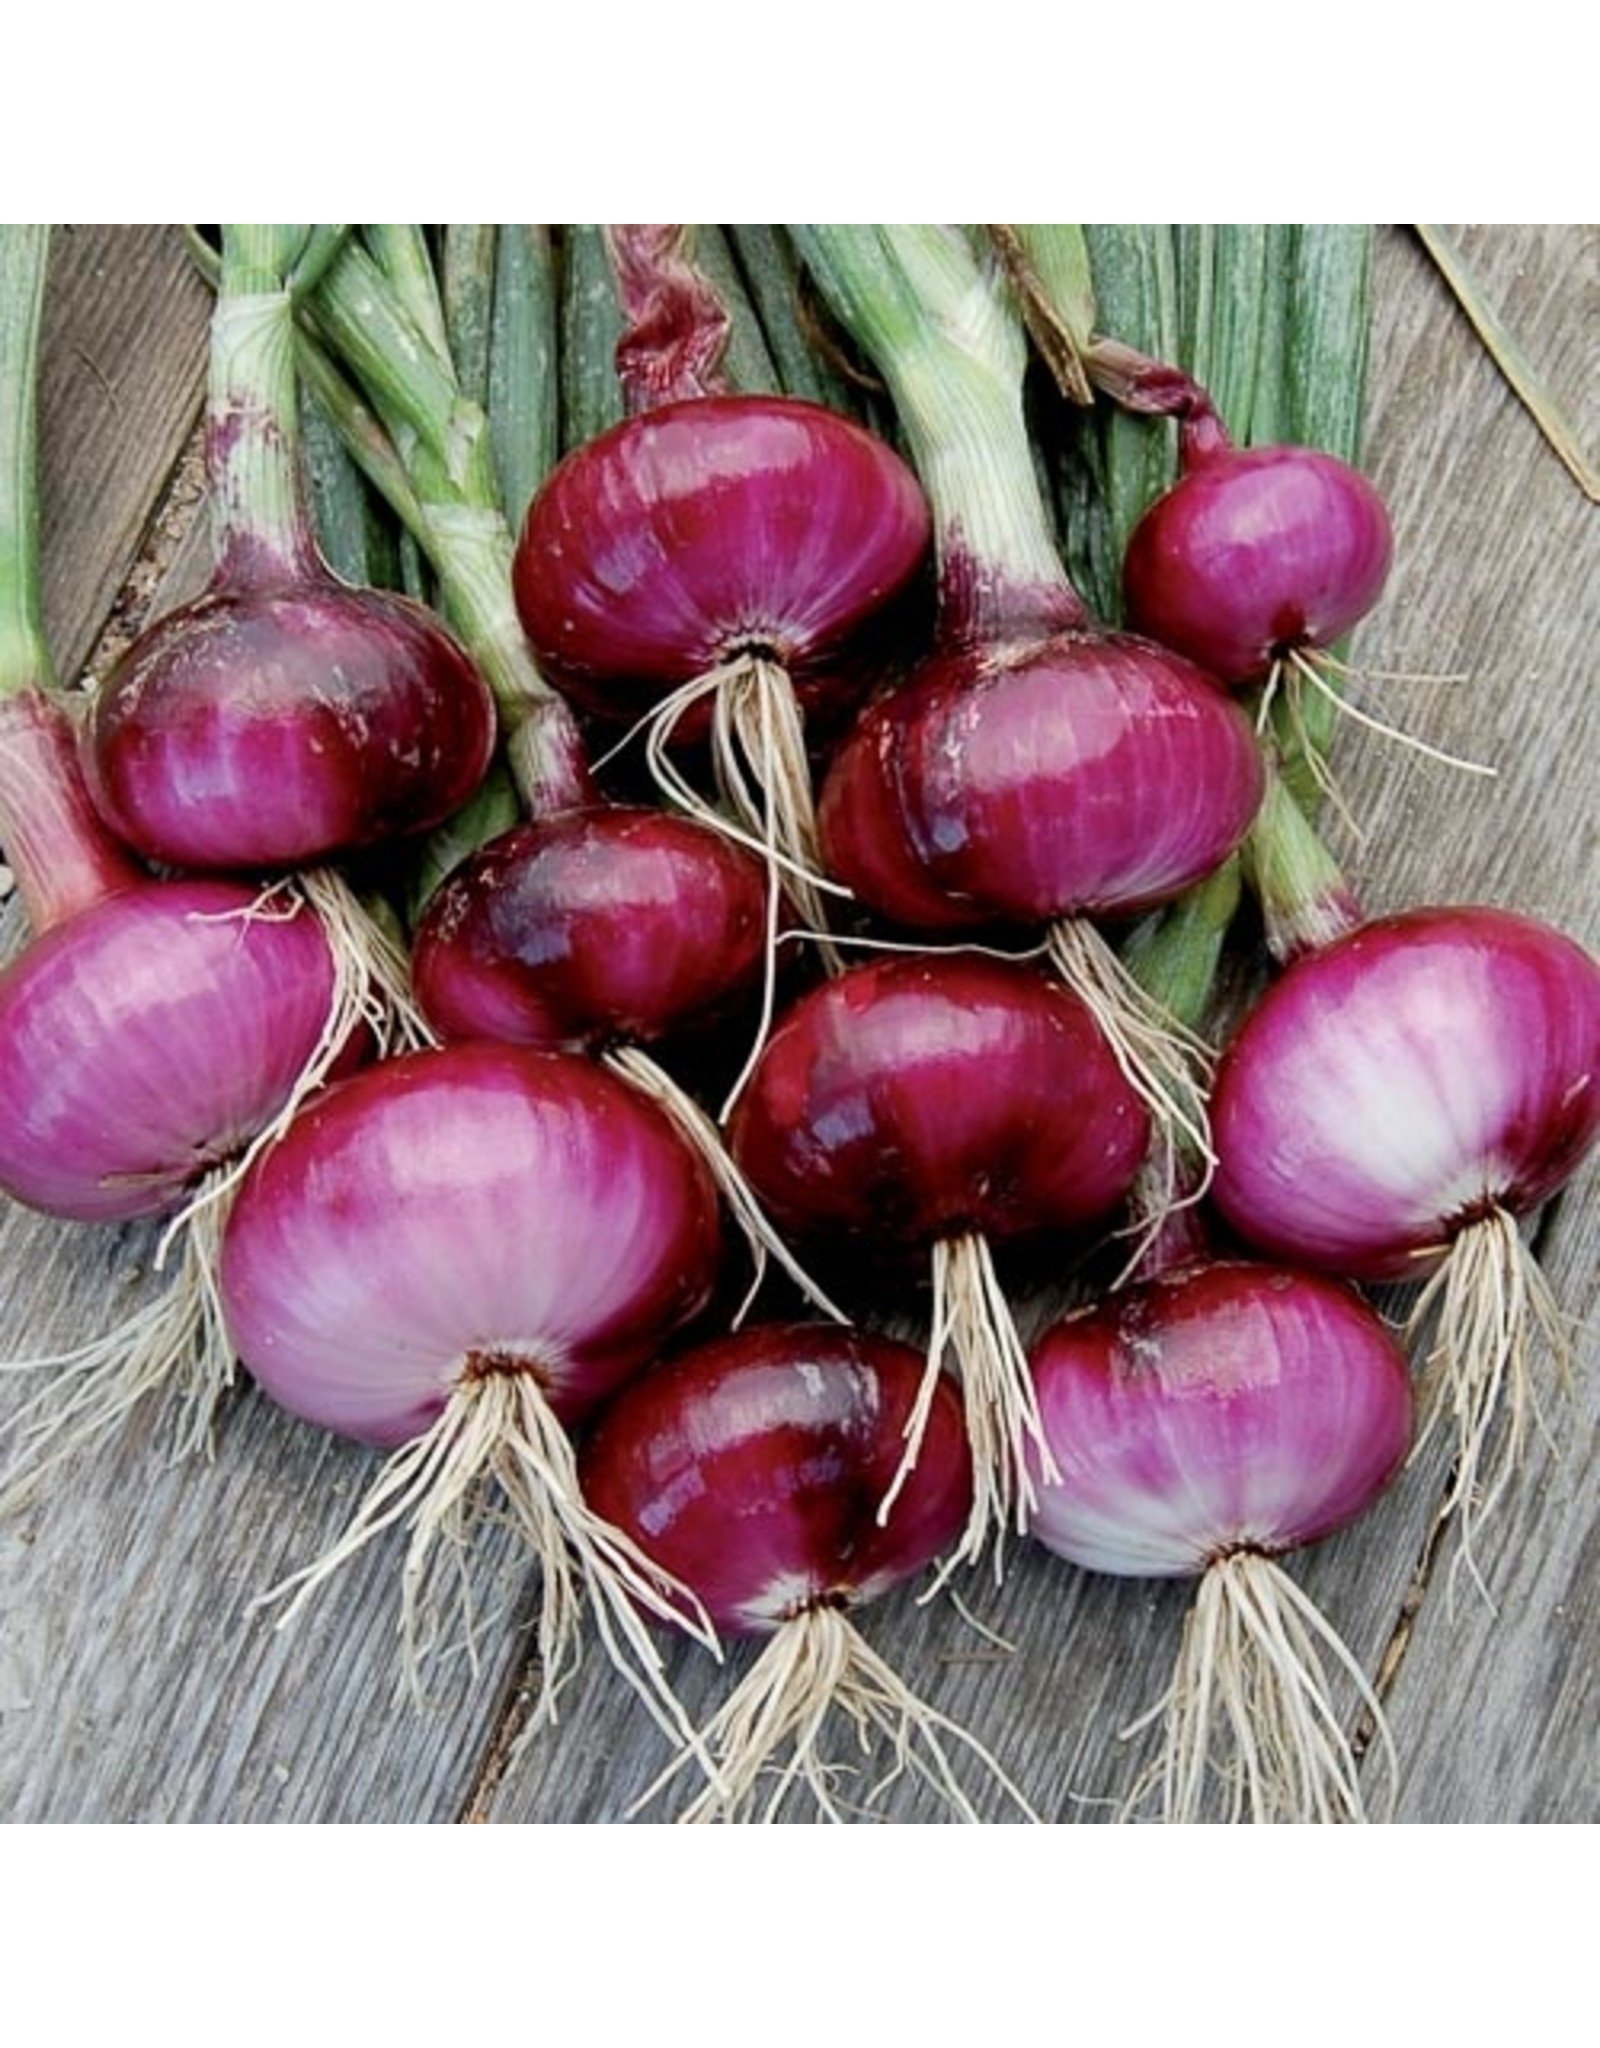 Seed Savers Onion - Red Wethersfield